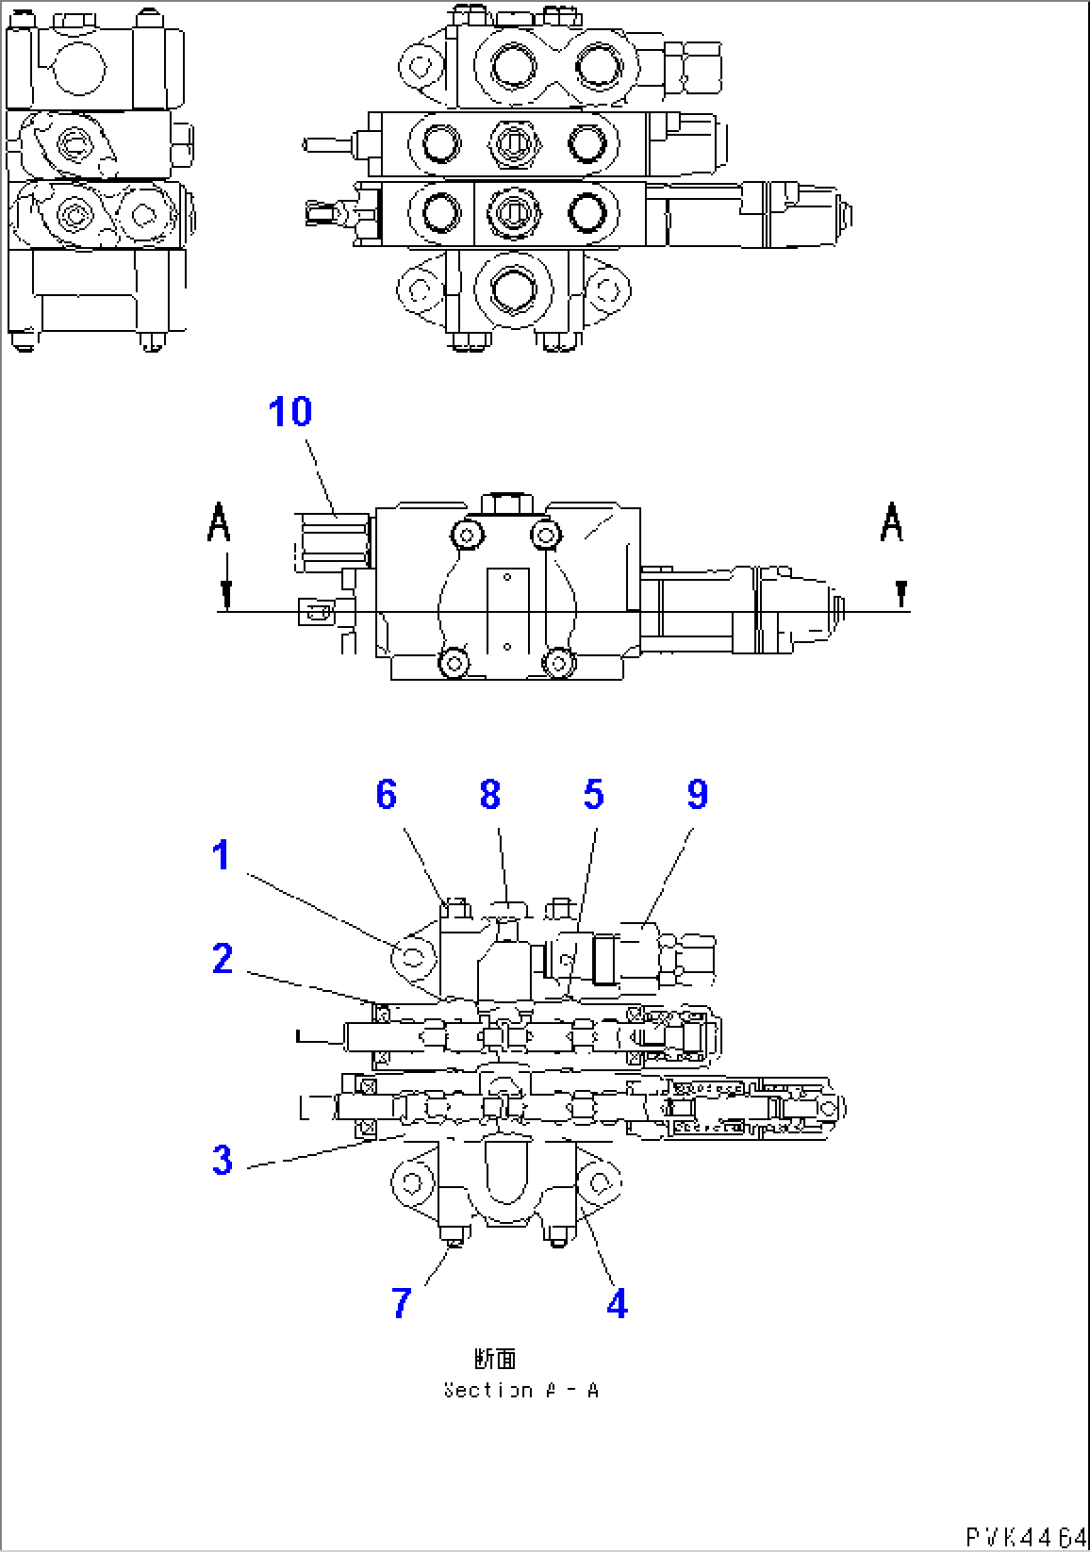 MAIN VALVE (WITH BACK HOE)(#78604-80198)